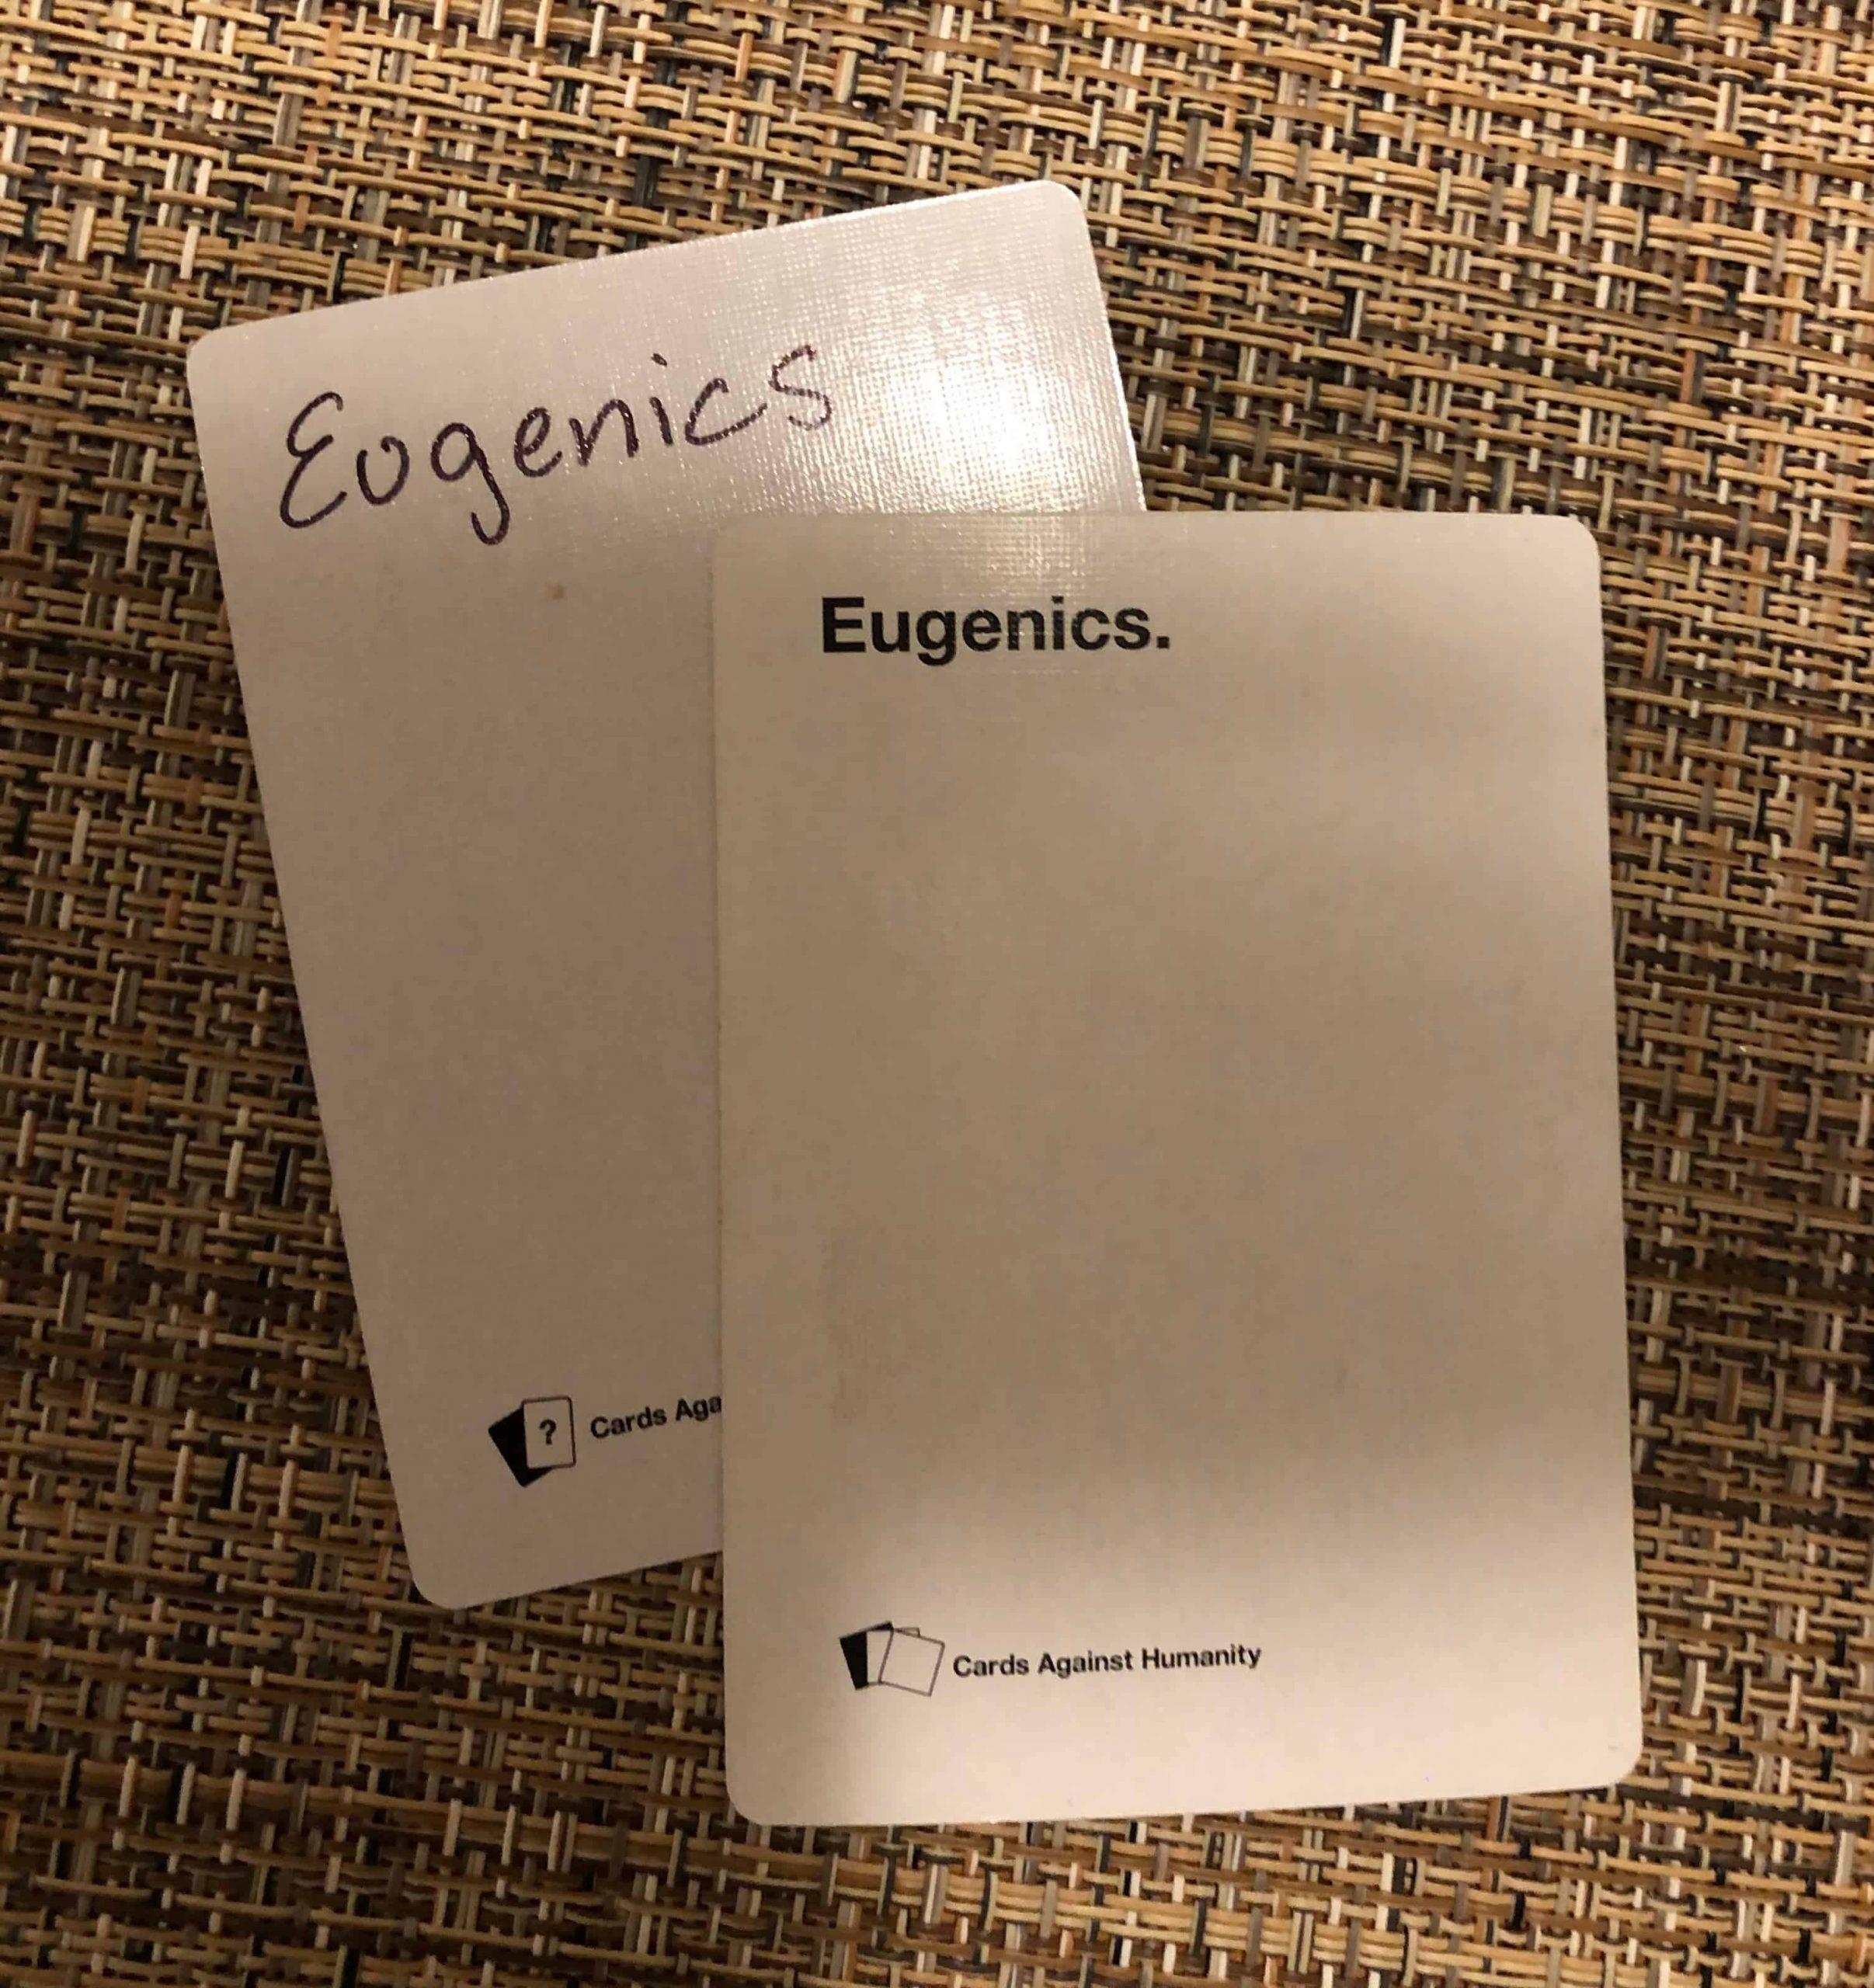 Eugenics Cards Against Humanity